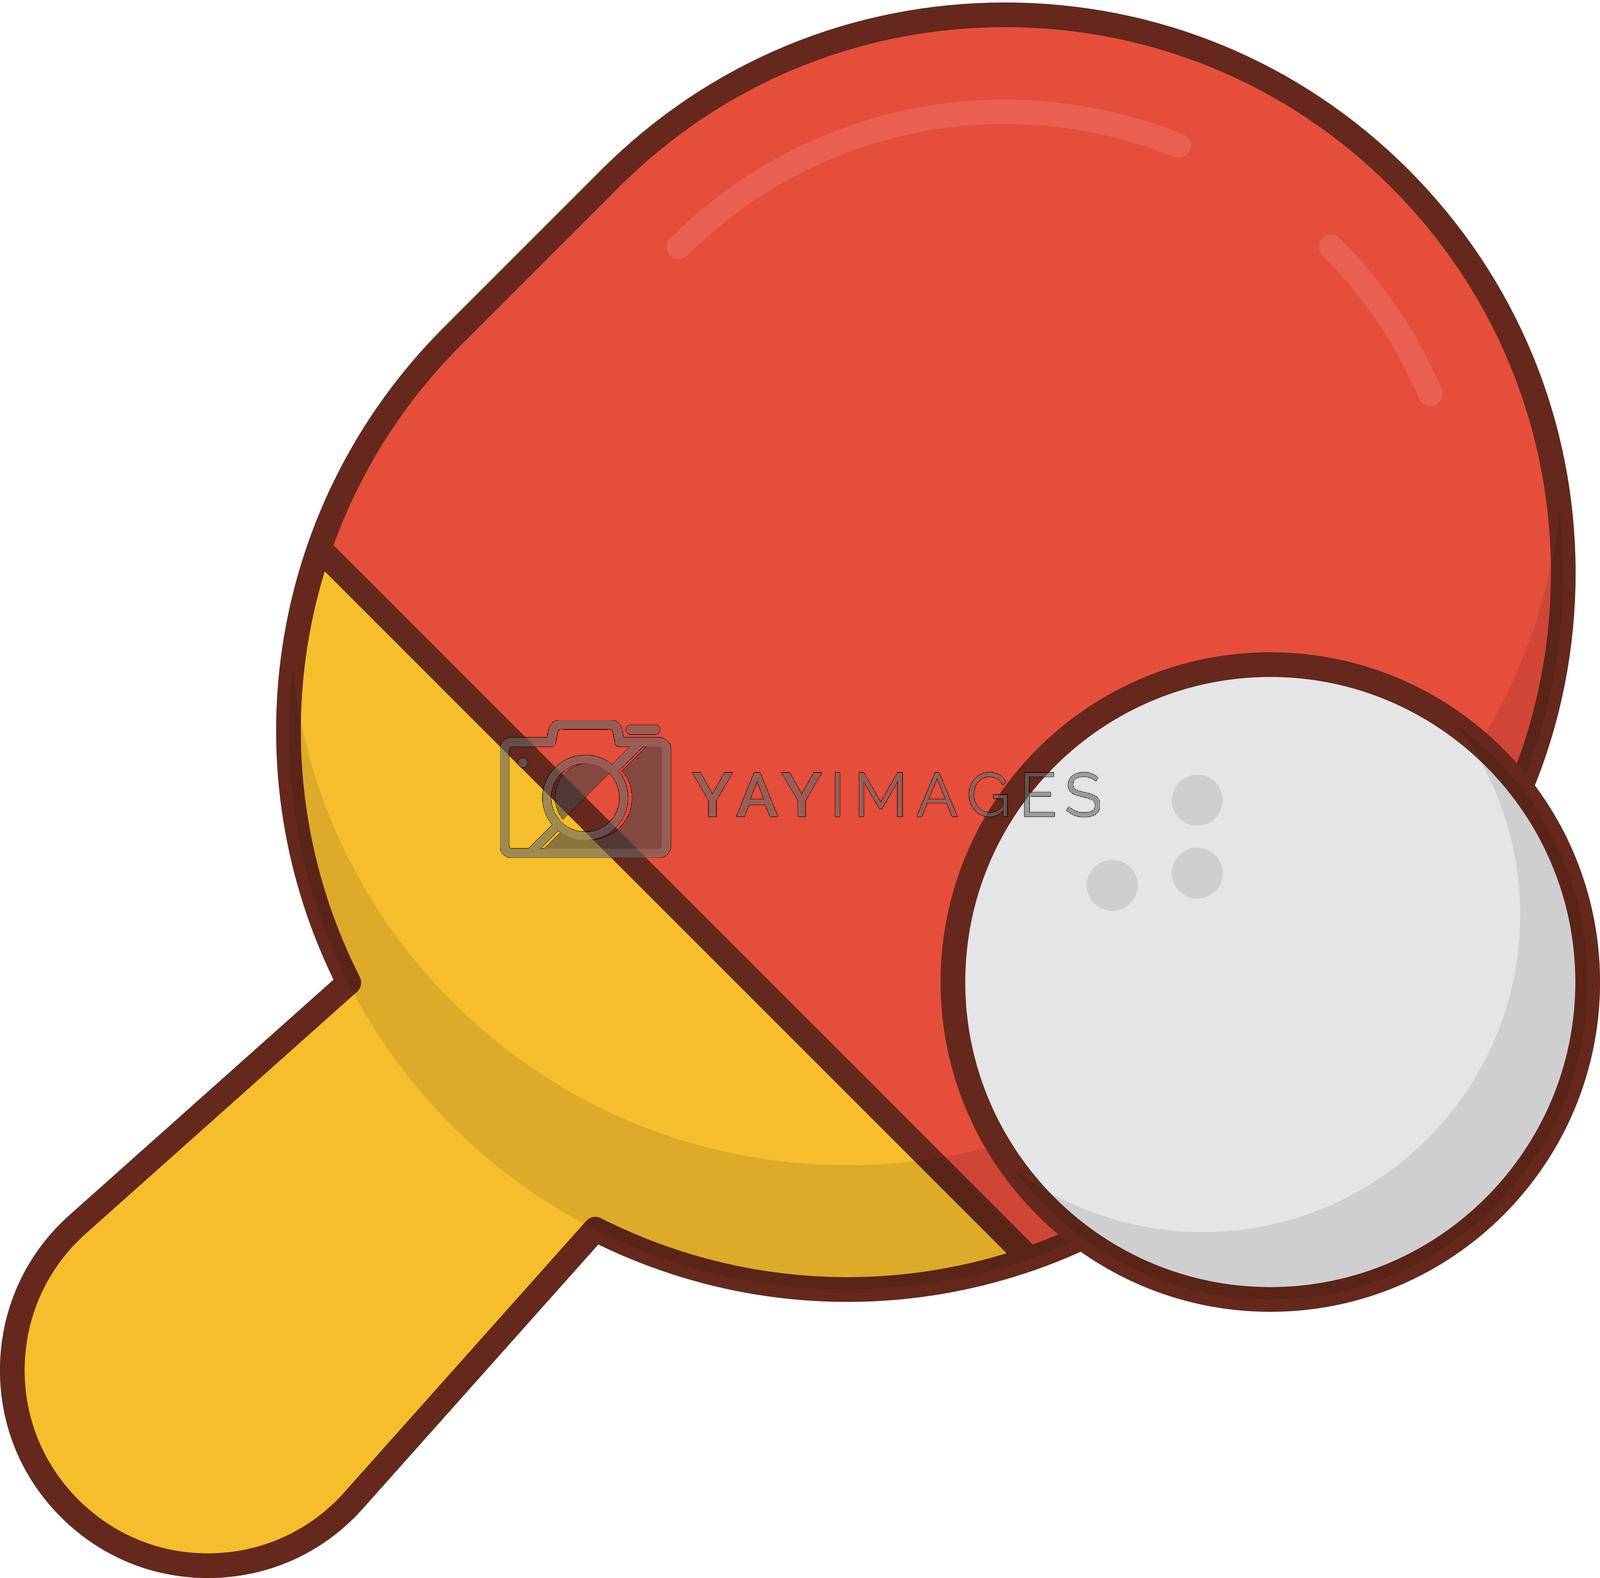 Royalty free image of ping pong by FlaticonsDesign